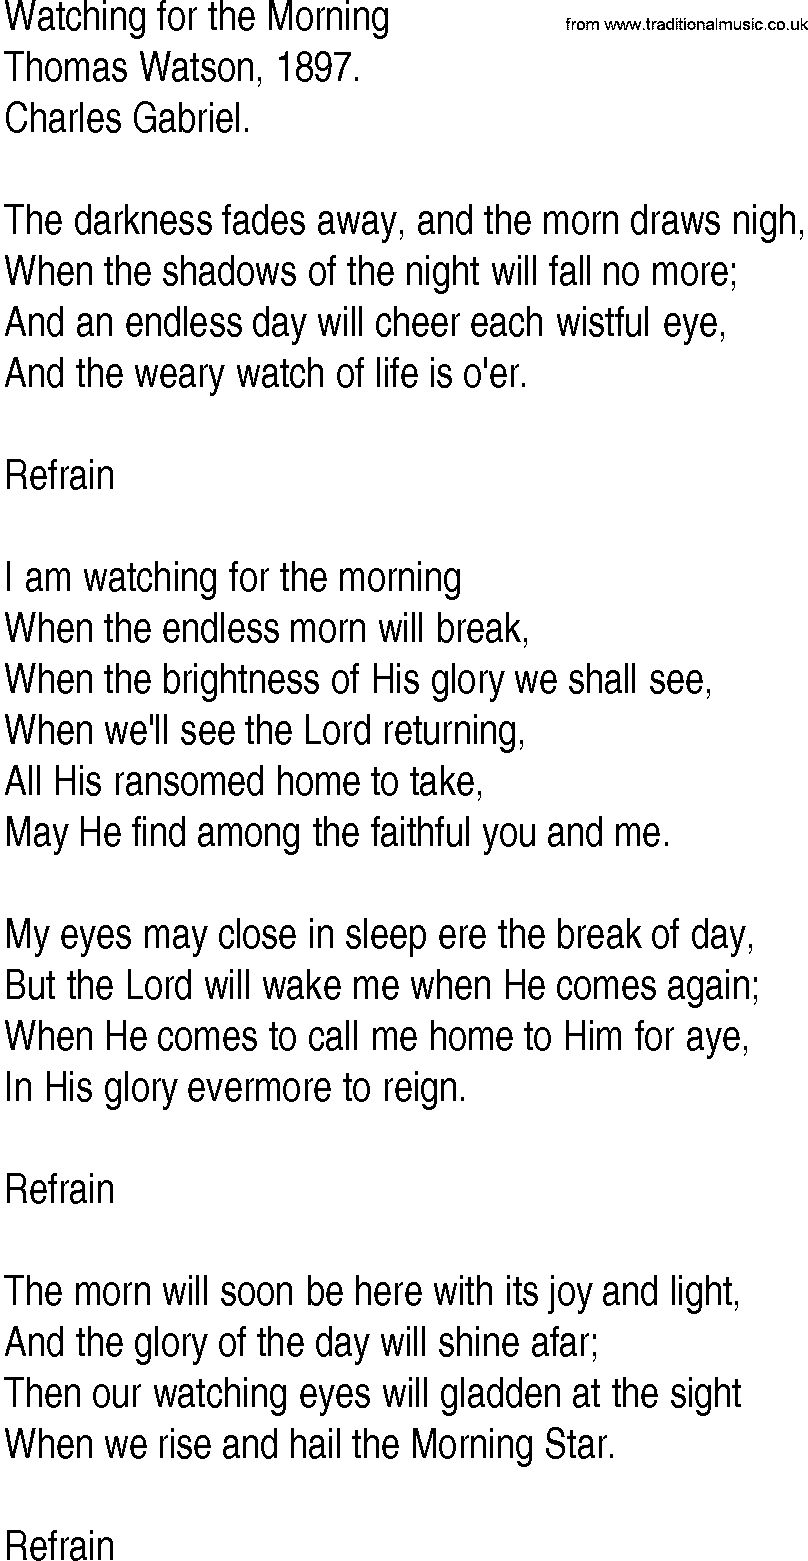 Hymn and Gospel Song: Watching for the Morning by Thomas Watson lyrics